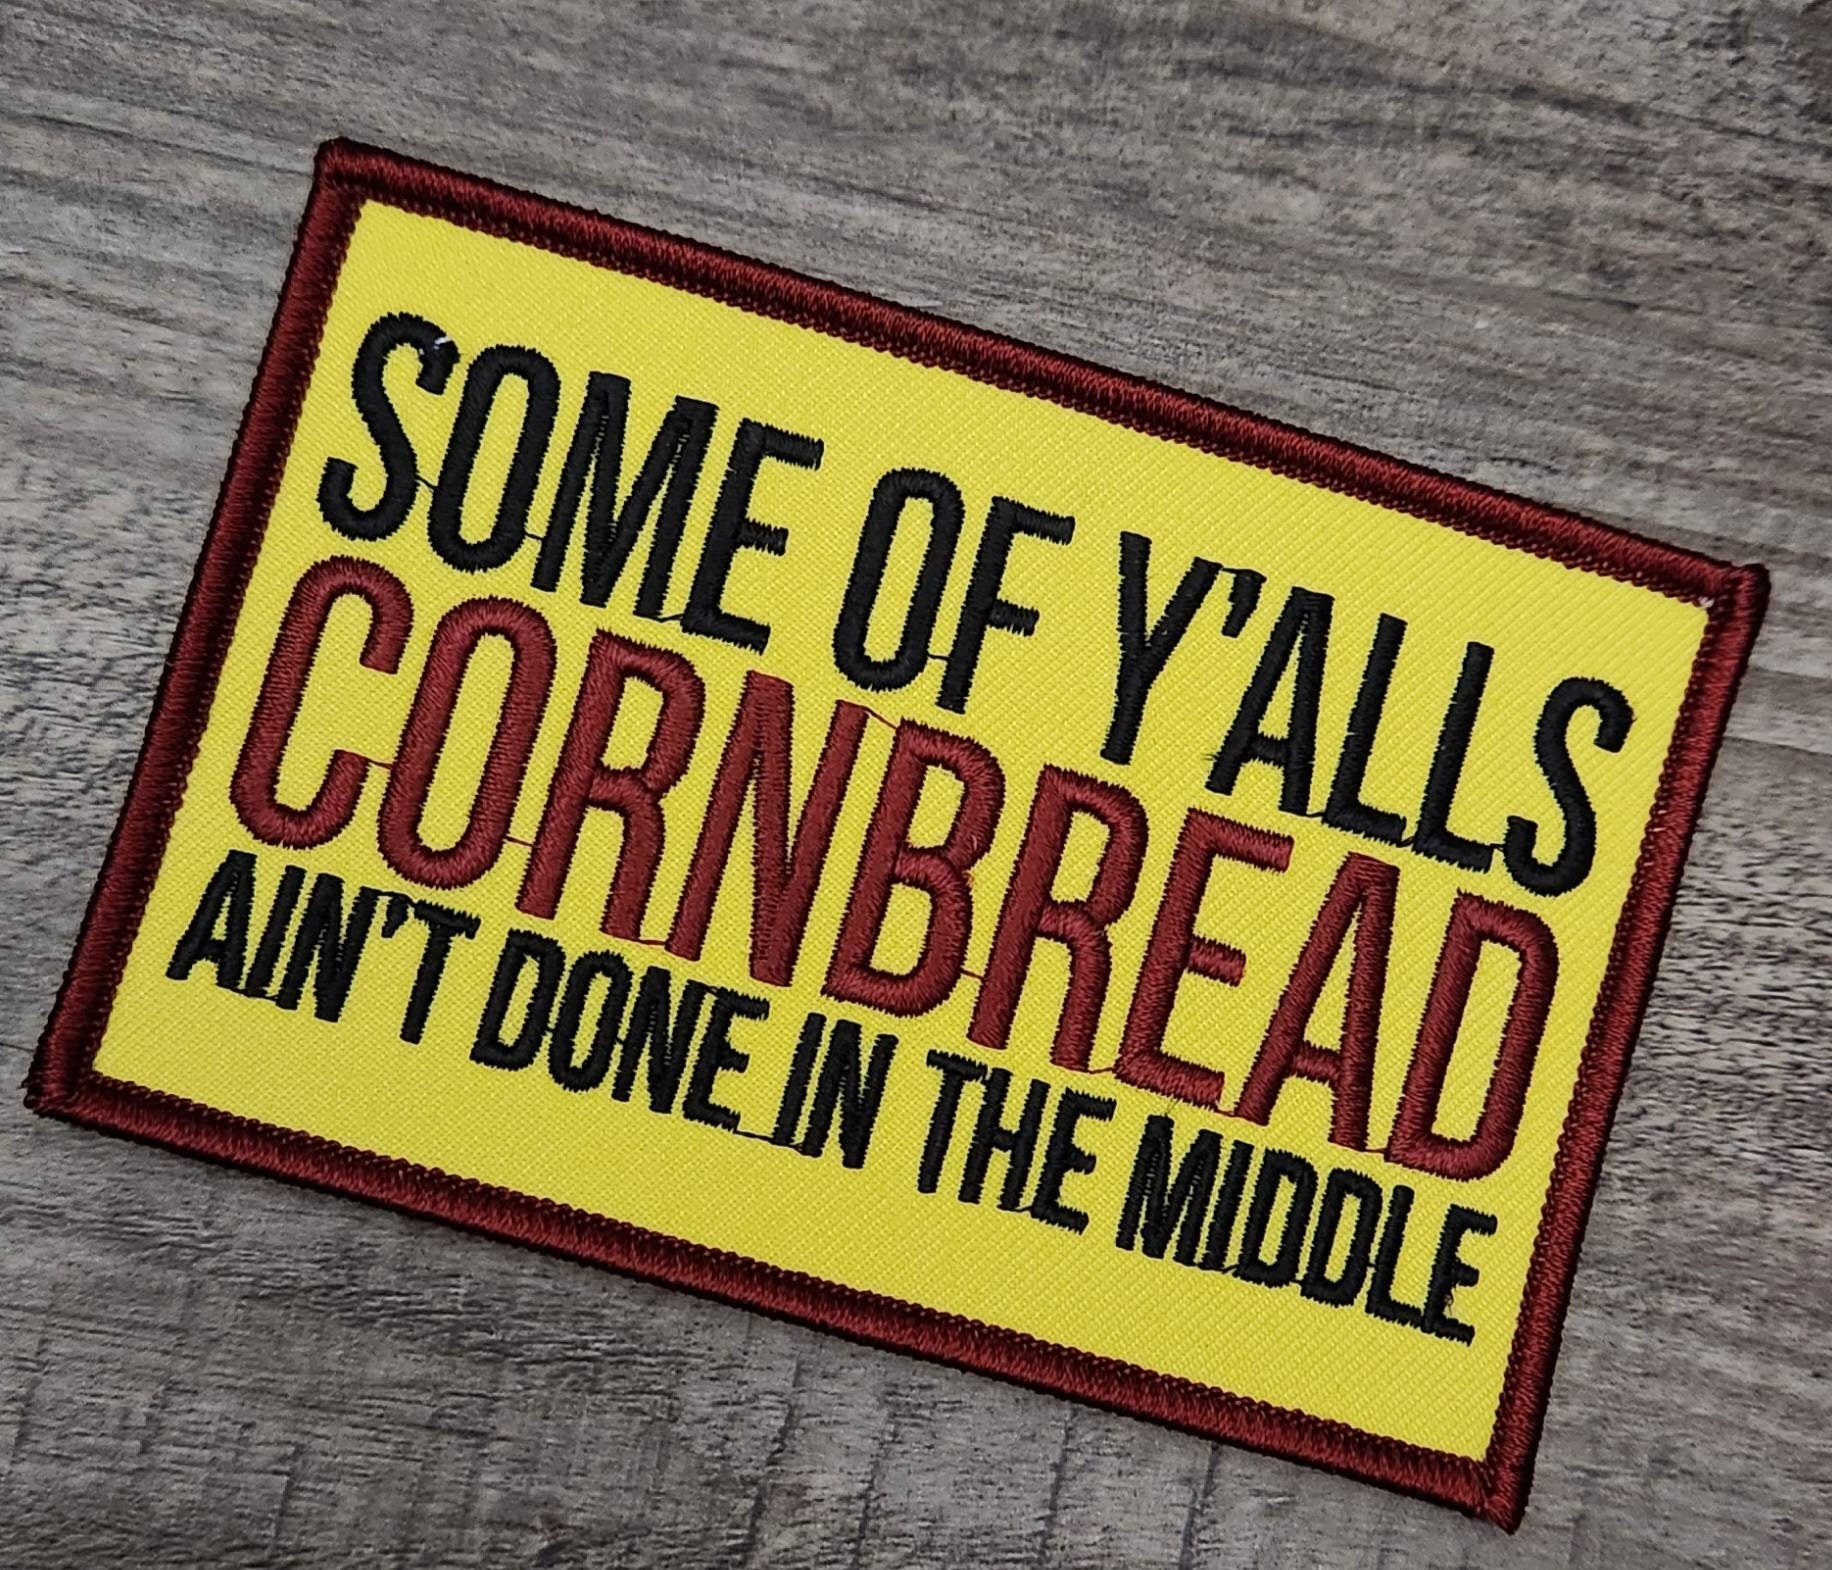 Funny Patch, 1-pc "Cornbread Ain't Done in the Middle" Statement Patch, Size 4.2"x2.75", Applique for Clothing, Iron-On Embroidered Patch